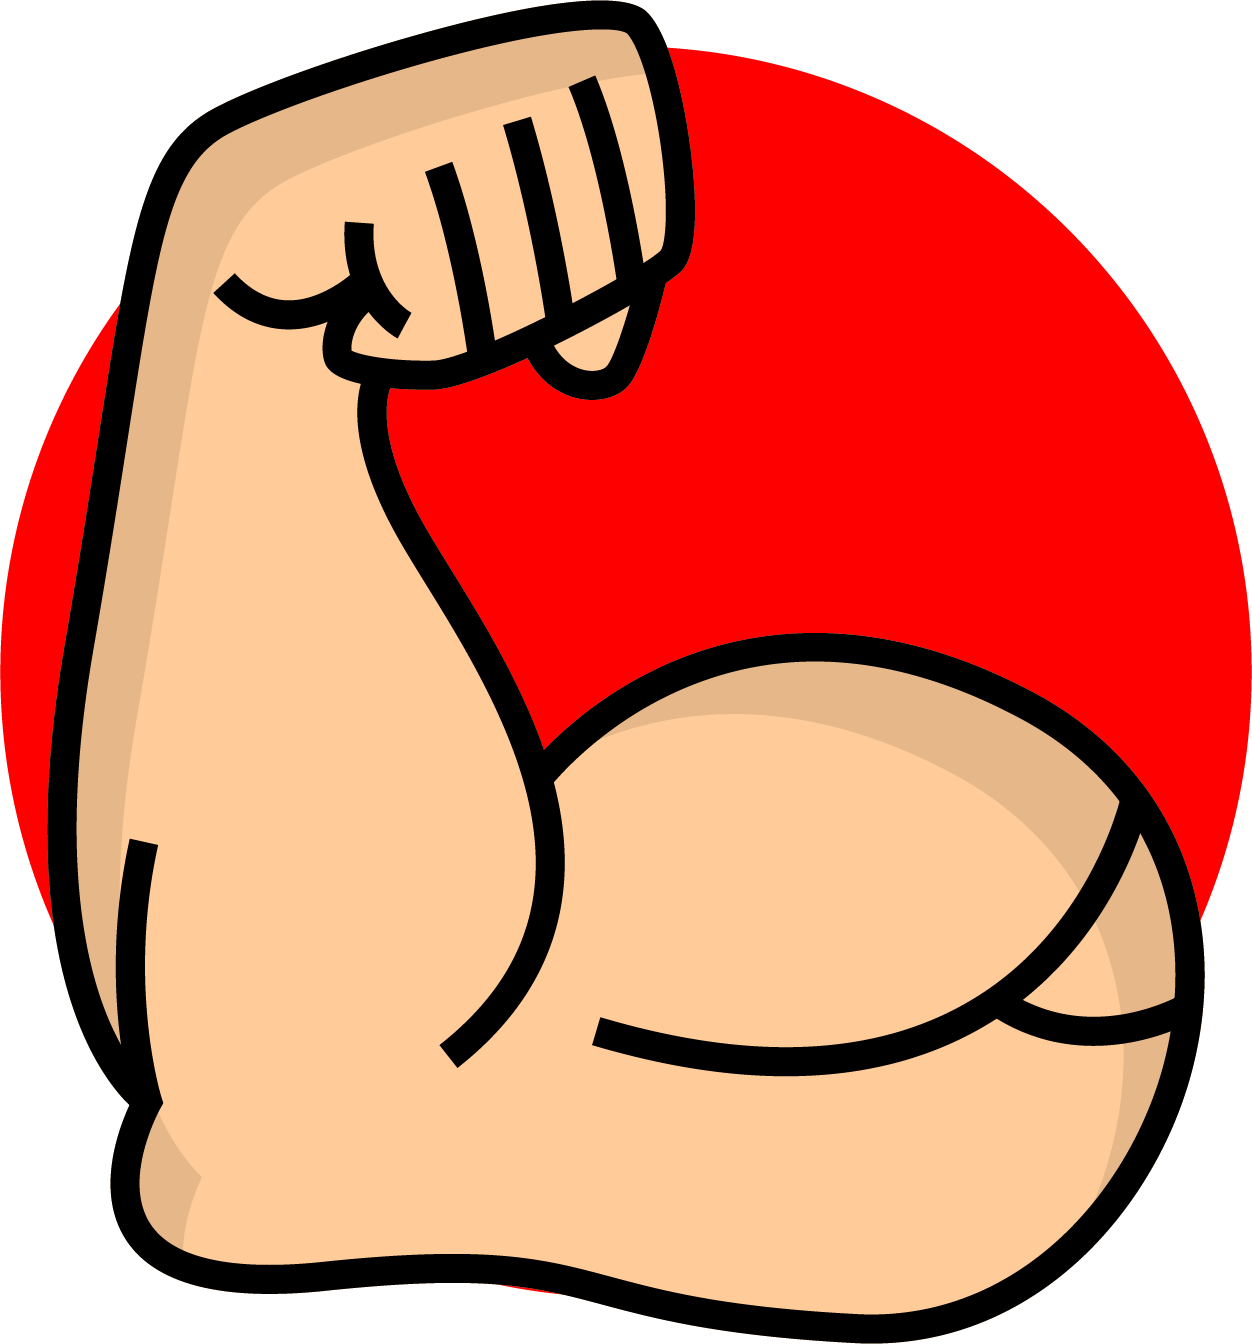 Limb Upper Strong Arm Icon Free Download Image PNG Image